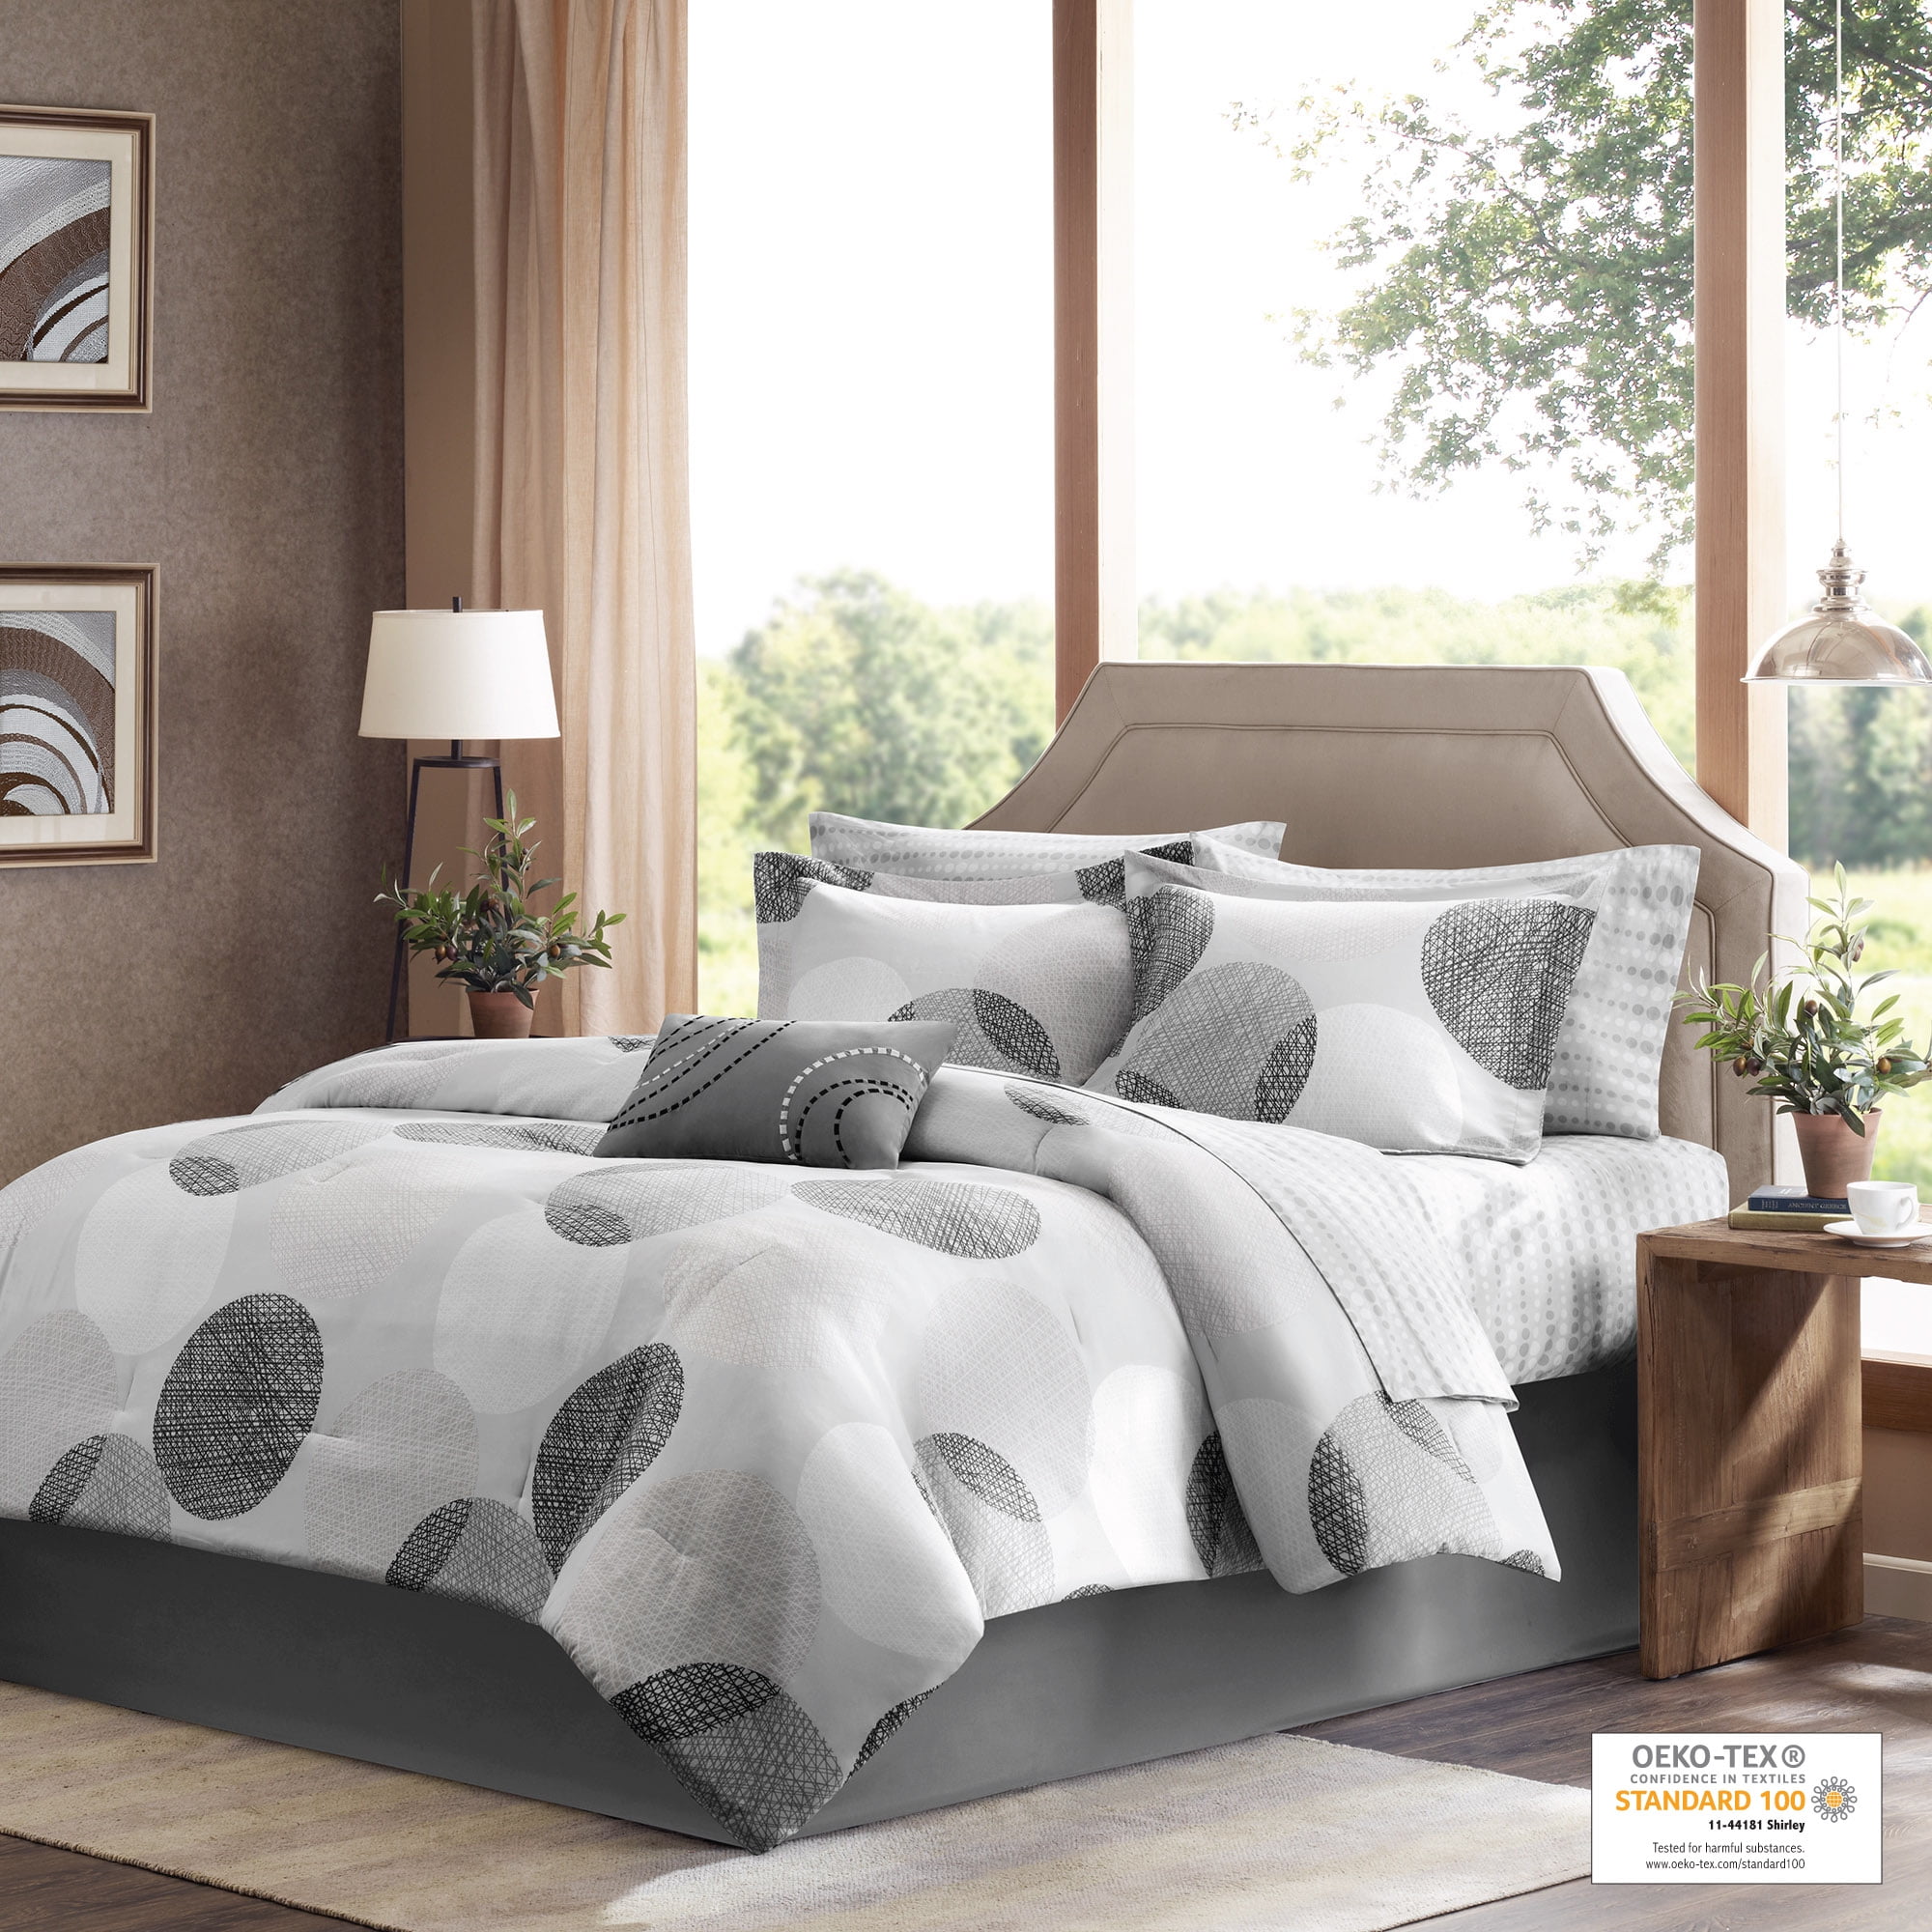 Madison Park Essentials Knowles Twin Comforter Set in Grey